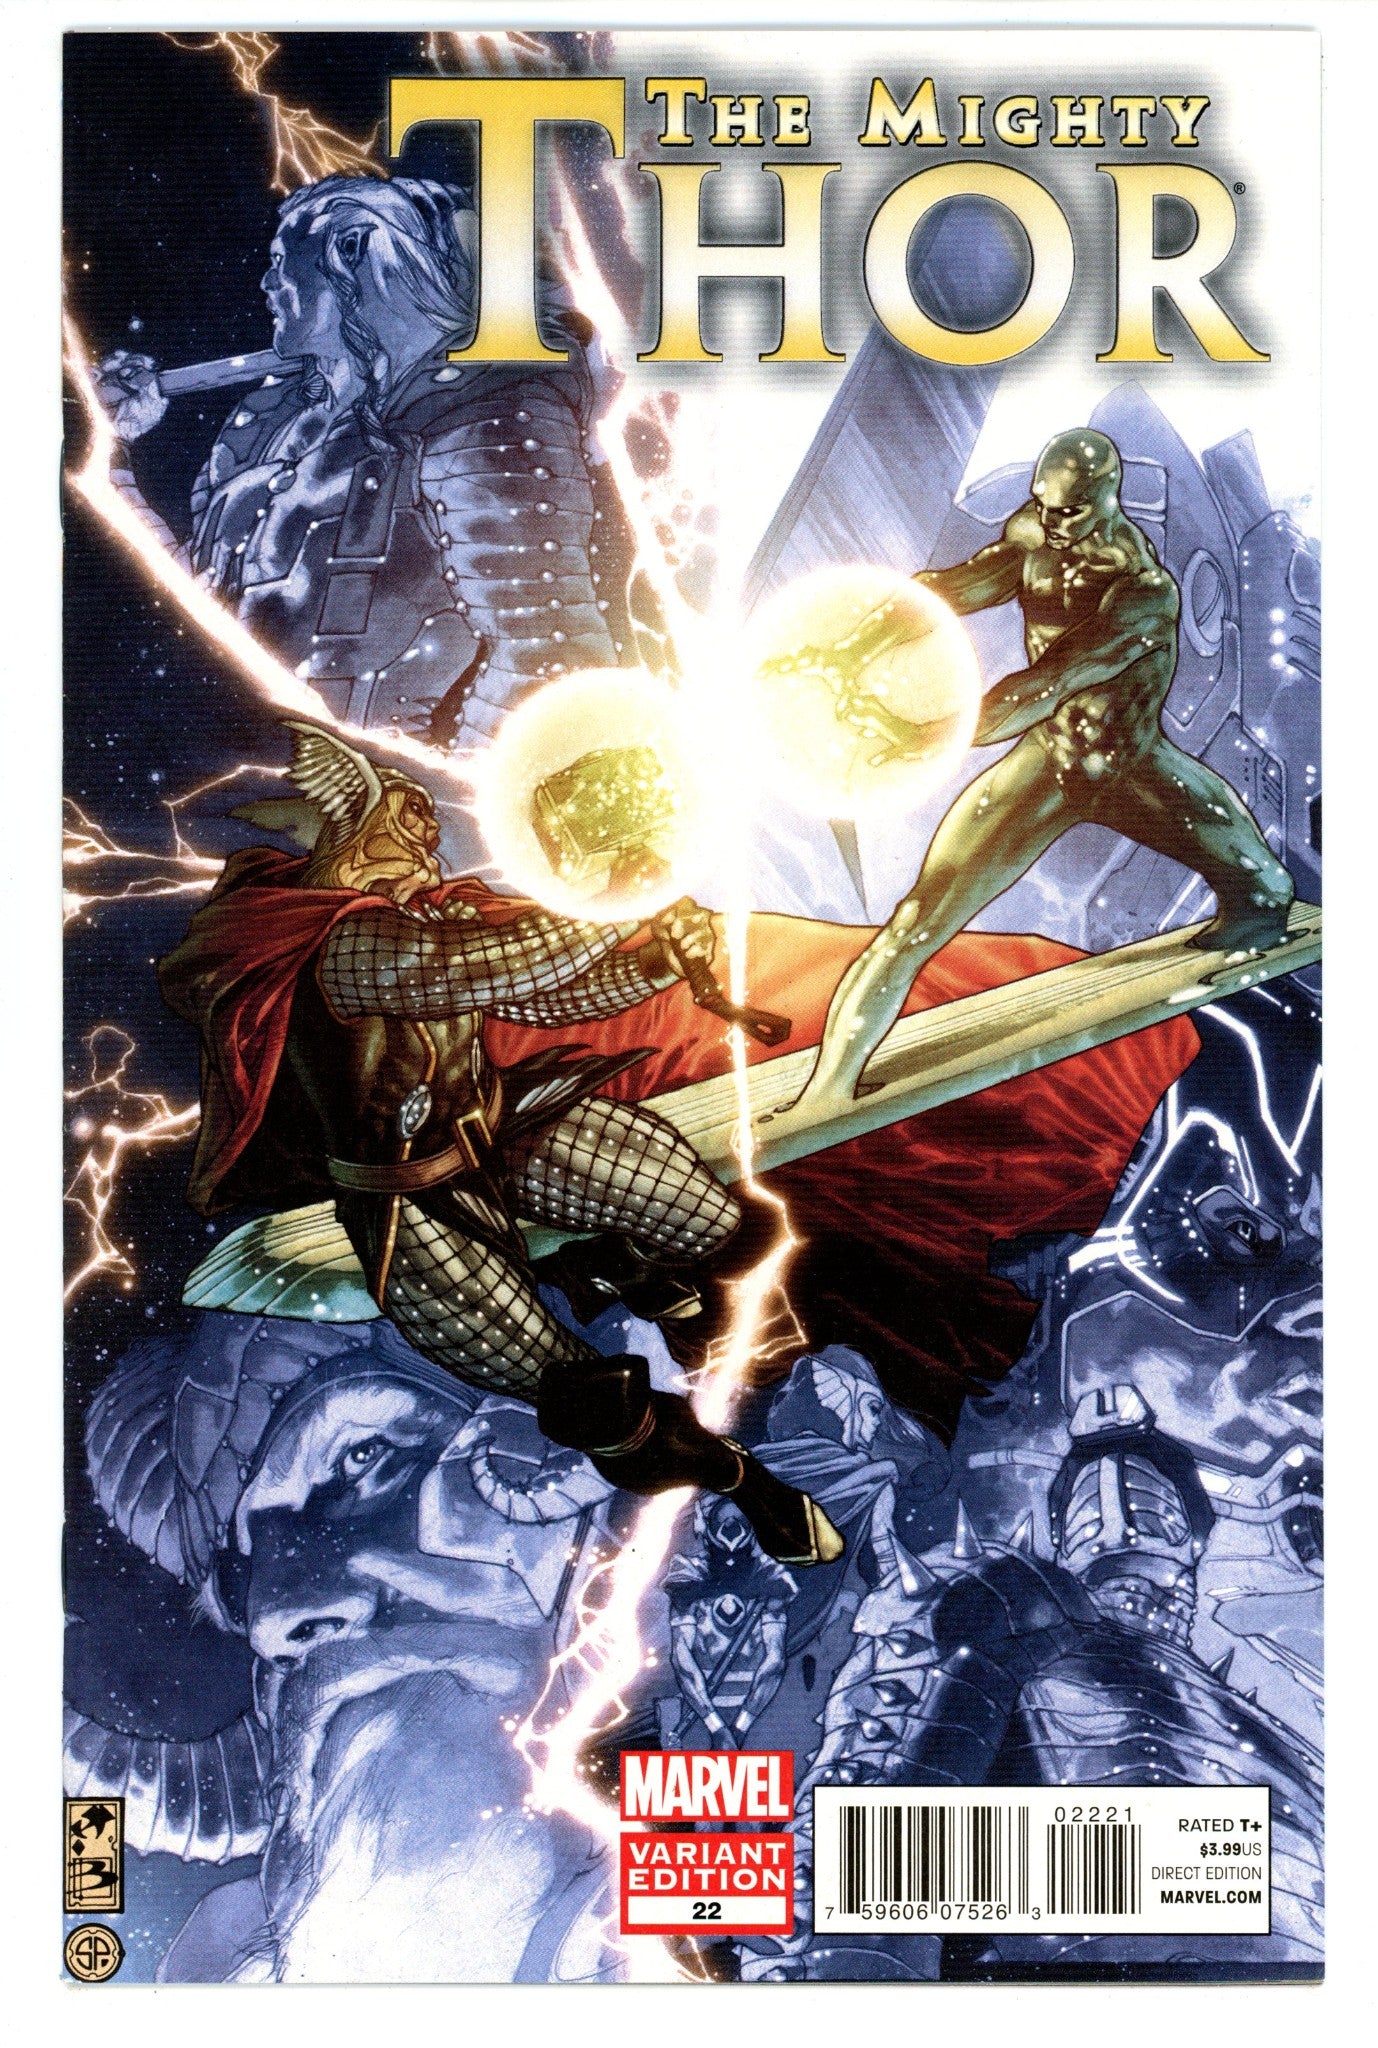 The Mighty Thor Vol 1 22 VF/NM (9.0) (2012) Bianchi Variant 